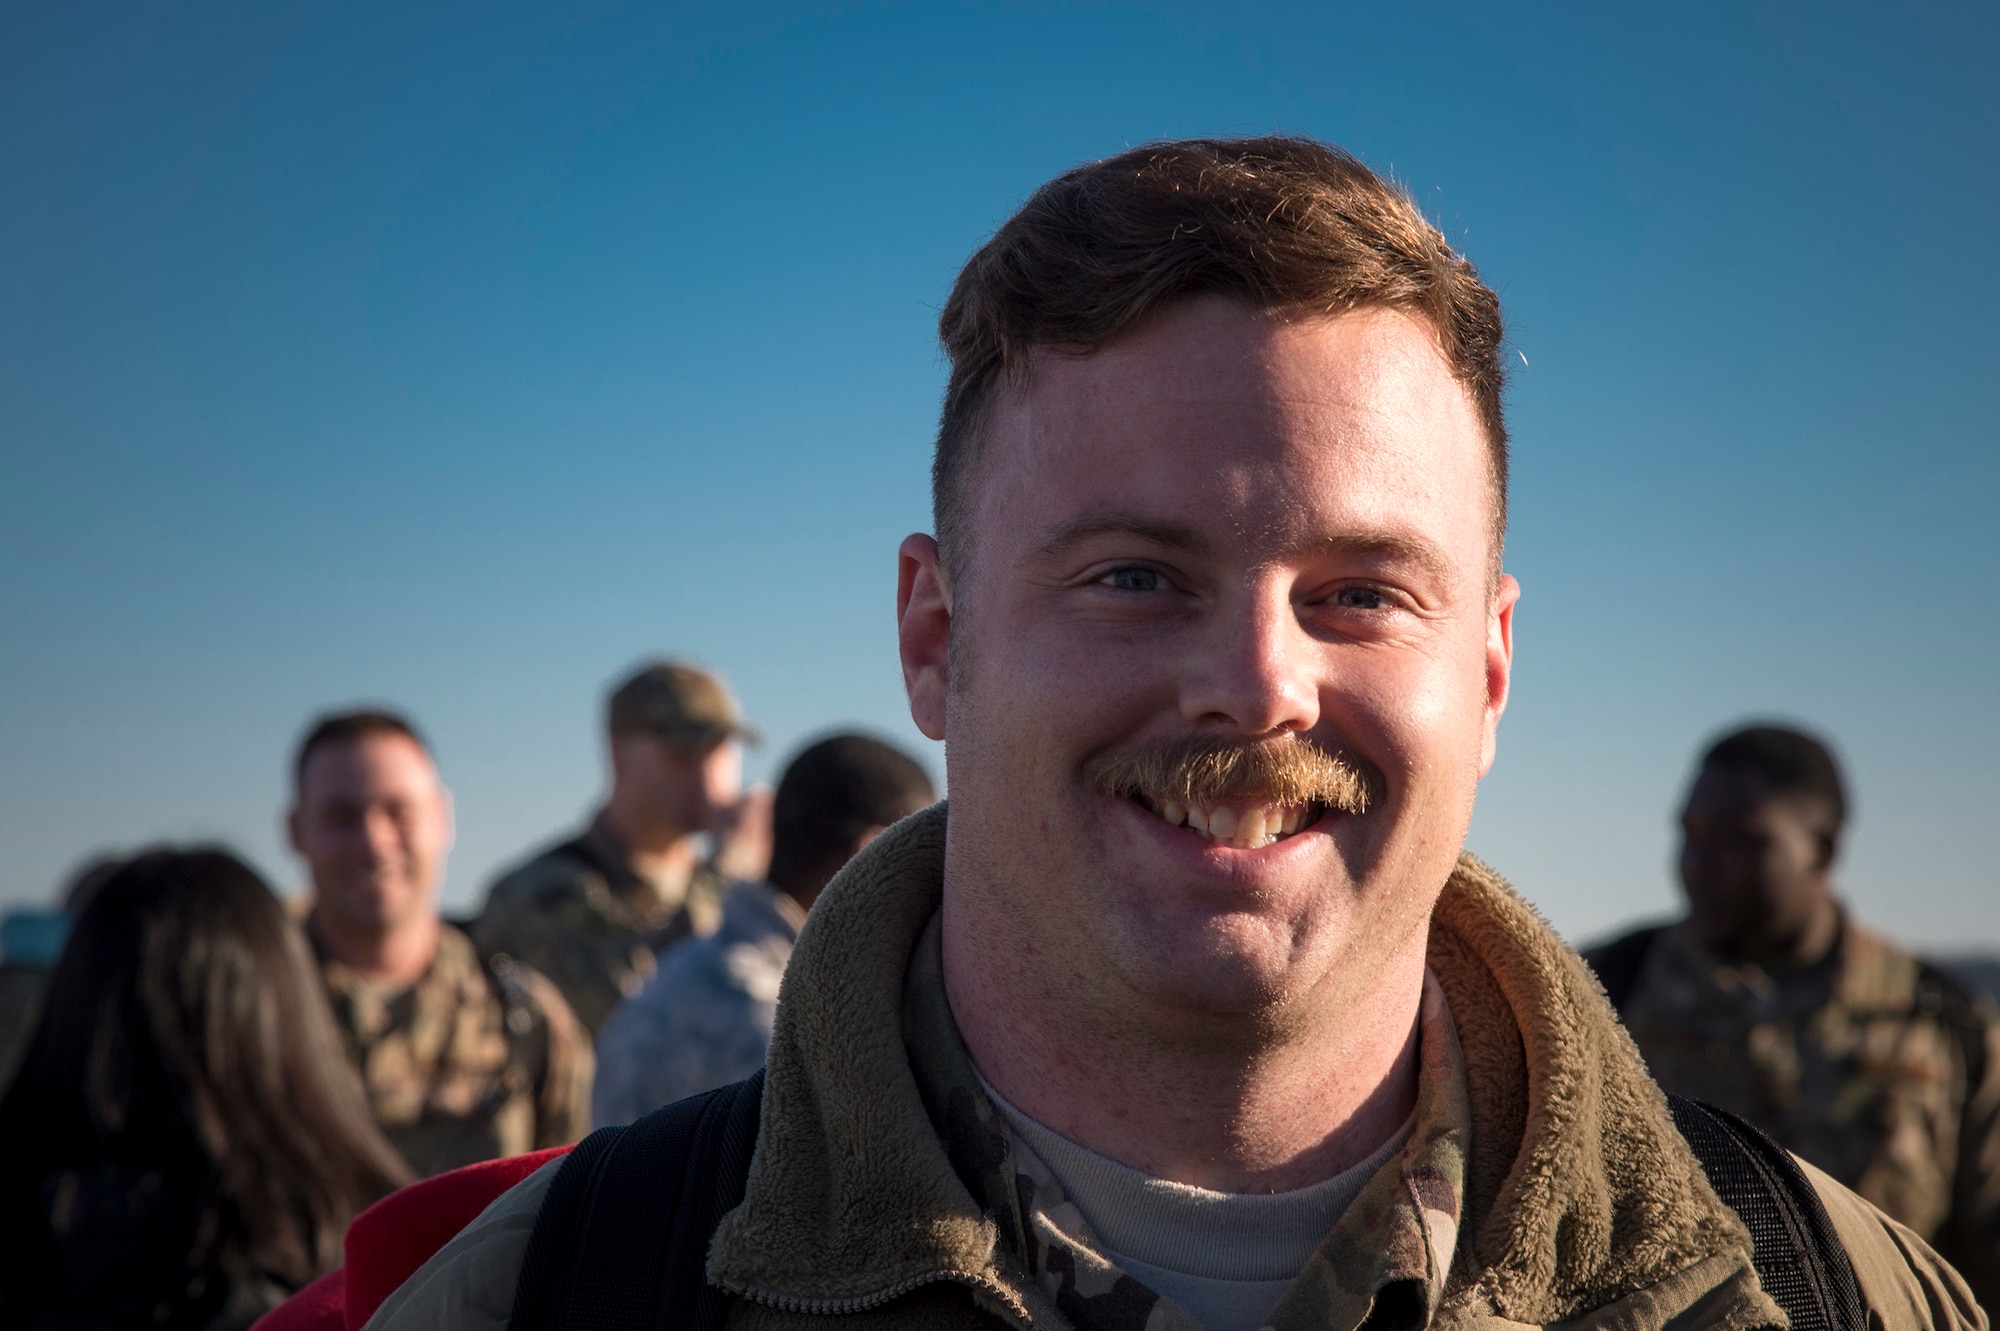 Staff Sgt. Kent Finnen, 74th Aircraft Maintenance Unit weapons team chief, poses for photo during a redeployment ceremony, Jan. 19, 2018, at Moody Air Force Base, Ga. The 74th Fighter Squadron conducted around-the-clock planning and operations, which have decimated ISIS’ fighting capacity with precise strikes, erasing tens of thousands of fighters from ISIS rosters. (U.S. Air Force photo by Andrea Jenkins)